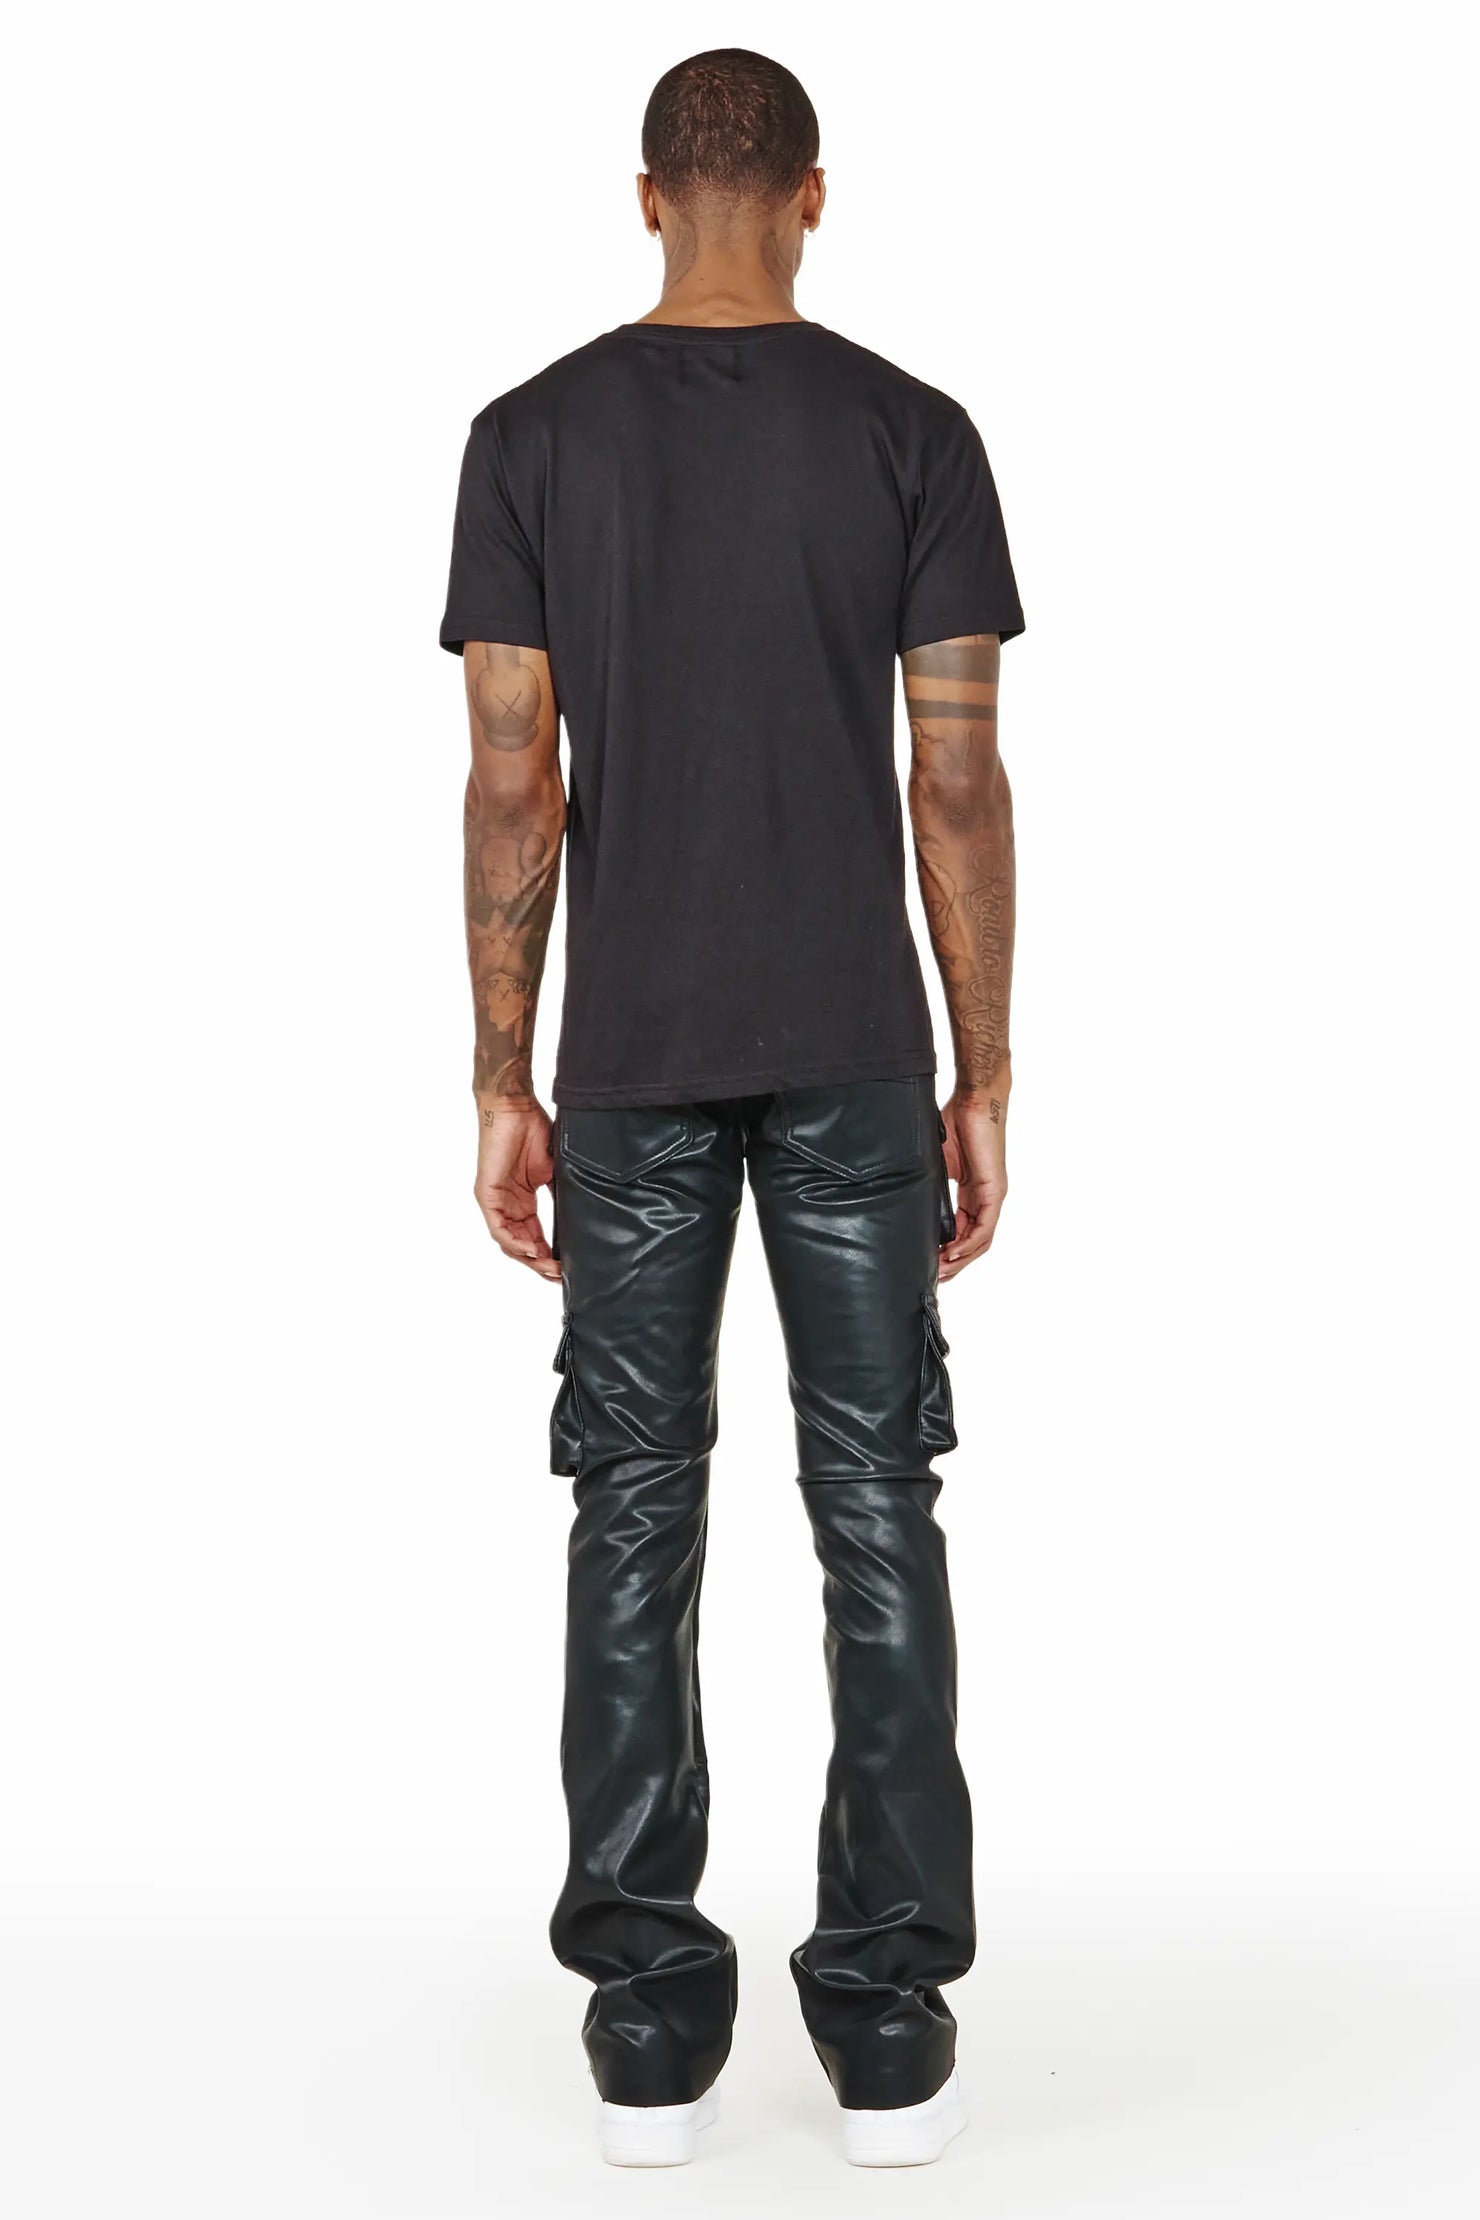 Khaza Black Faux Leather Stacked Flare Jean